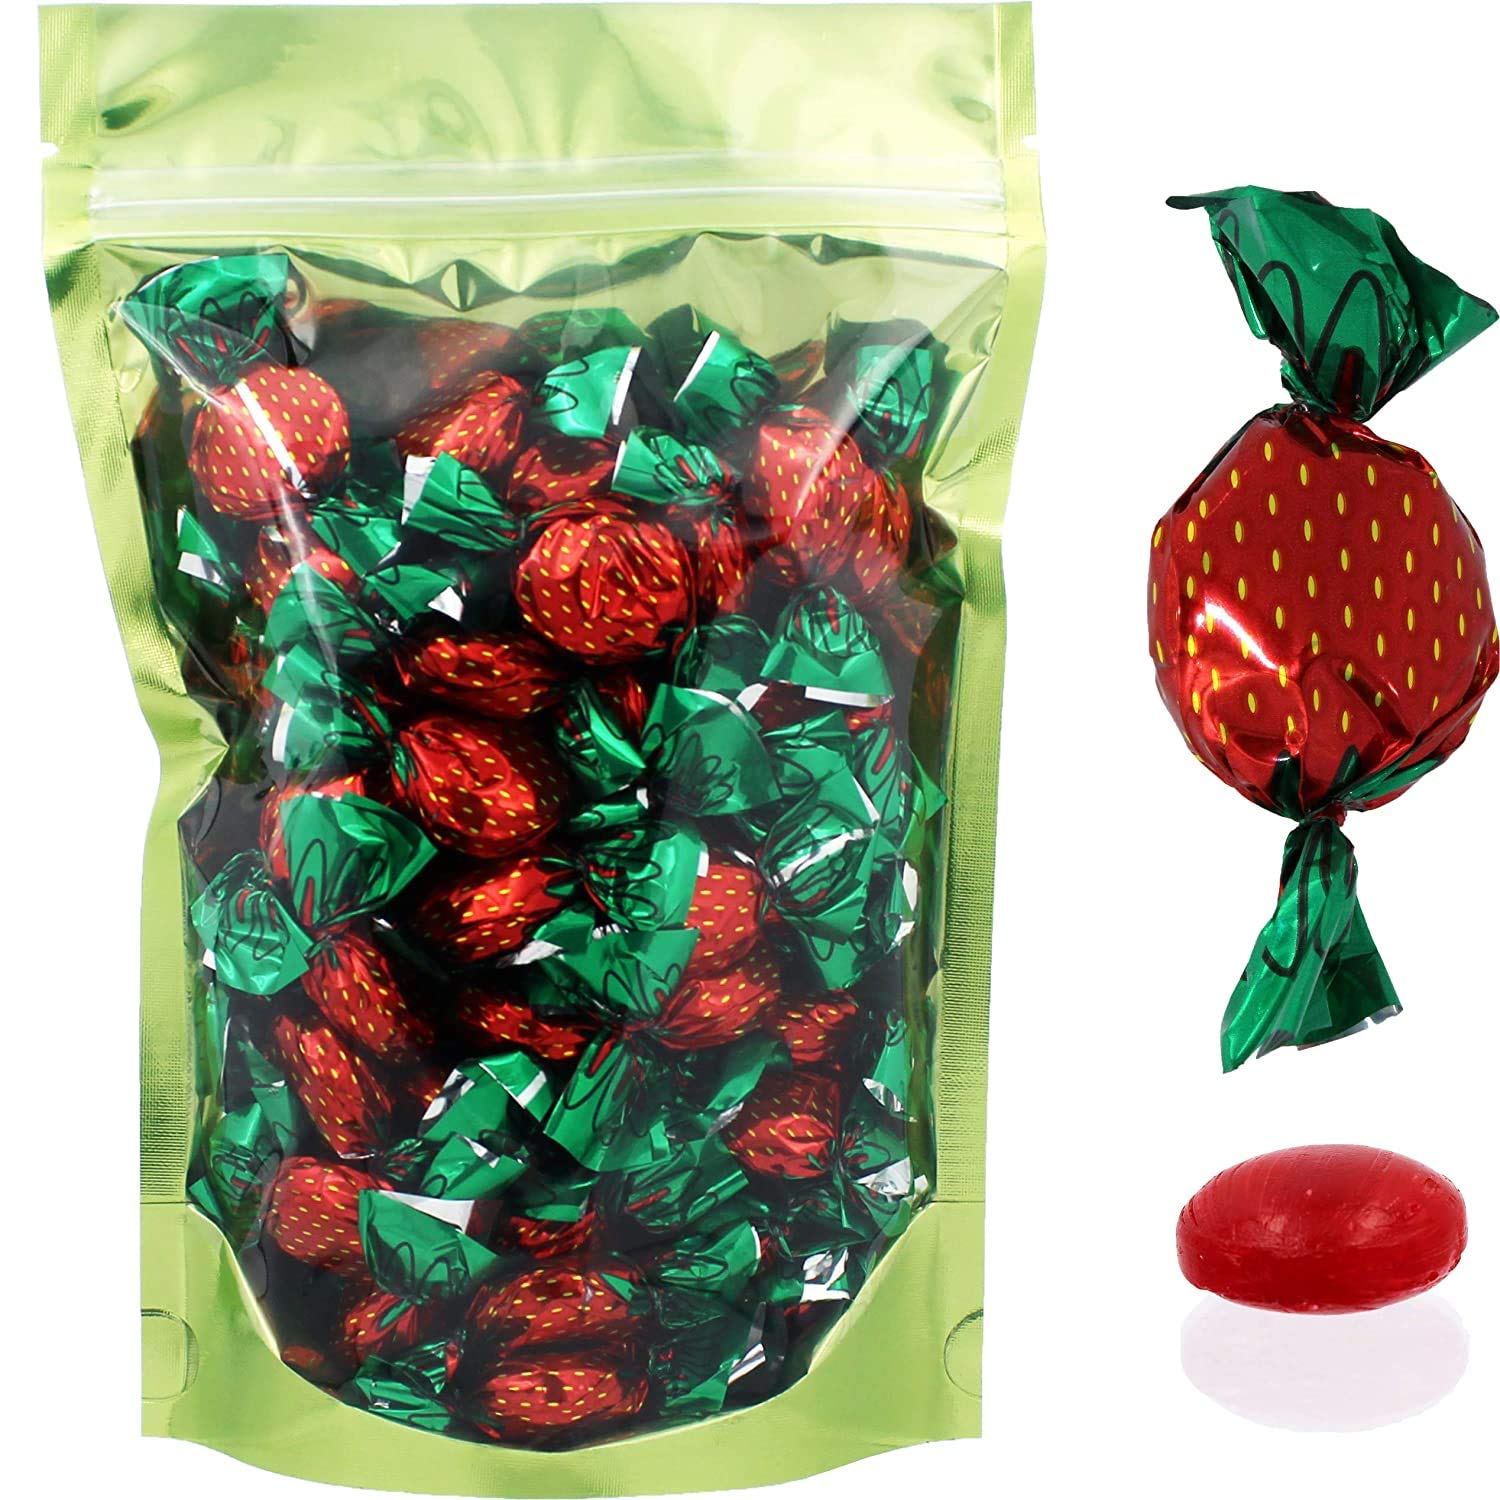  The Dreidel Company Strawberry Filled Flavored Candies, Individually Wrapped in Strawberry Wrap Design (8 Oz)